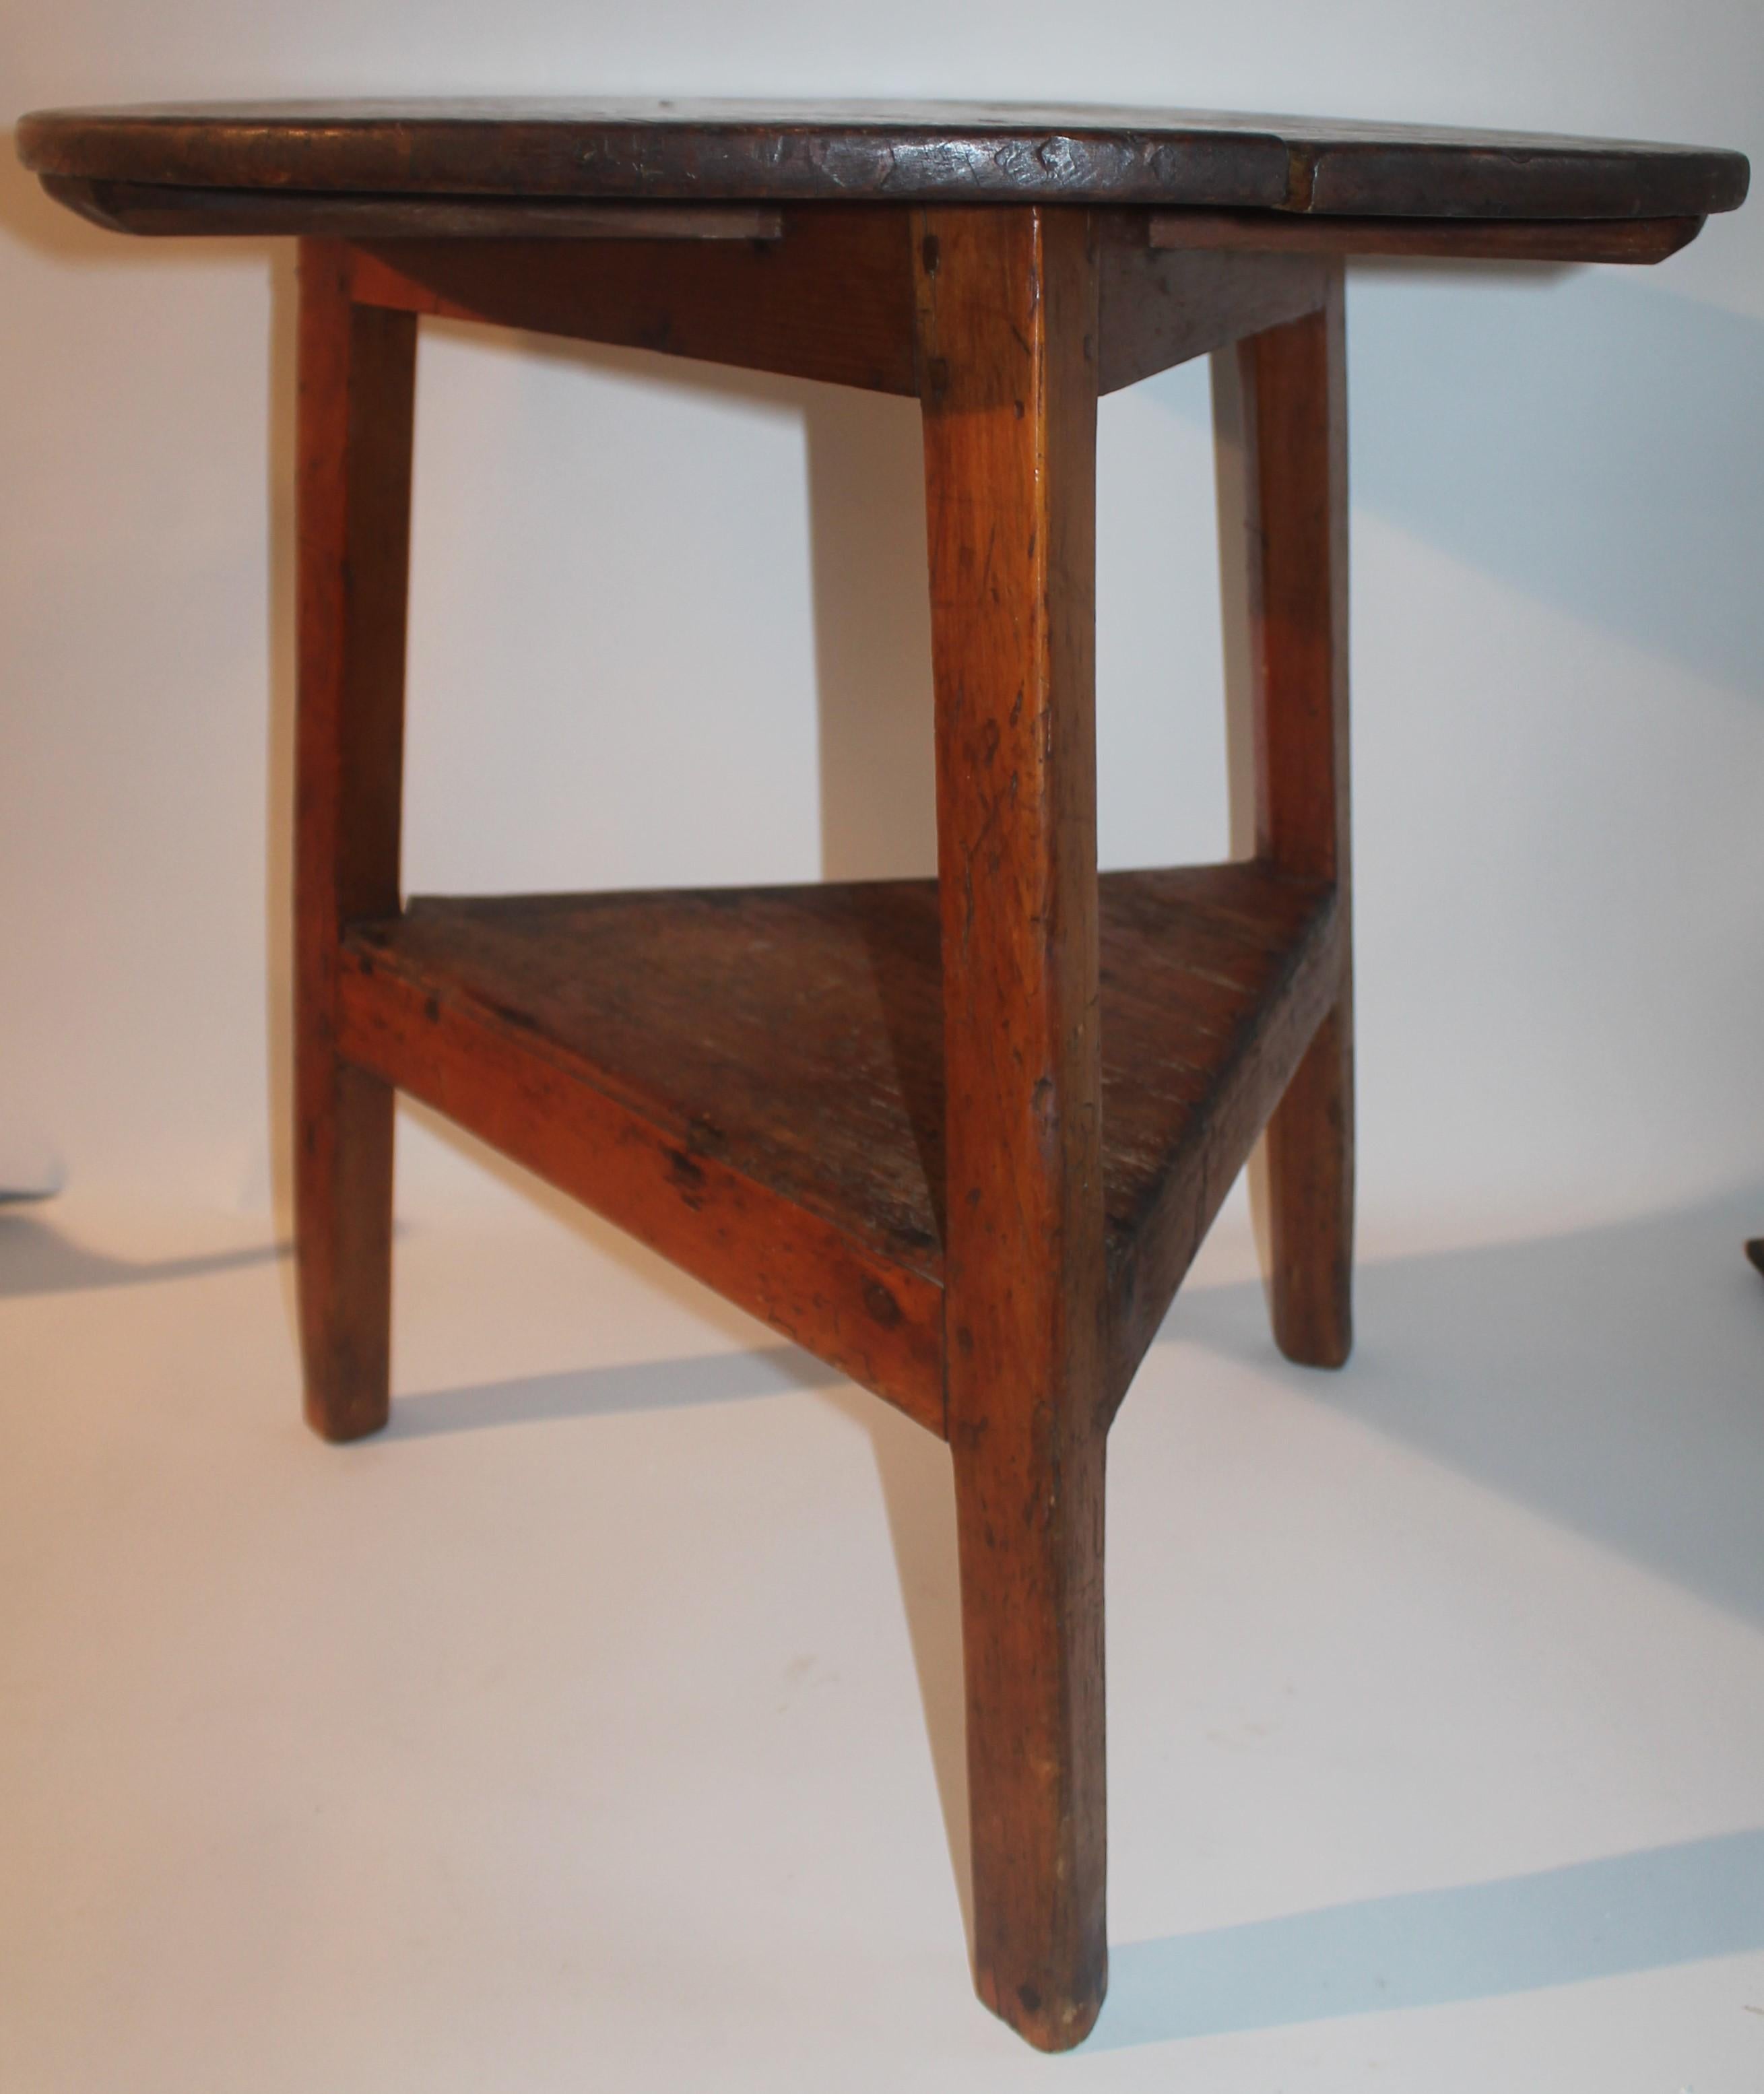 18thc cricket table from New England in fantastic condition. This three leg pine side table is in fine condition. It is constructed of cut nails & wood pegs. Wonderful aged patina.